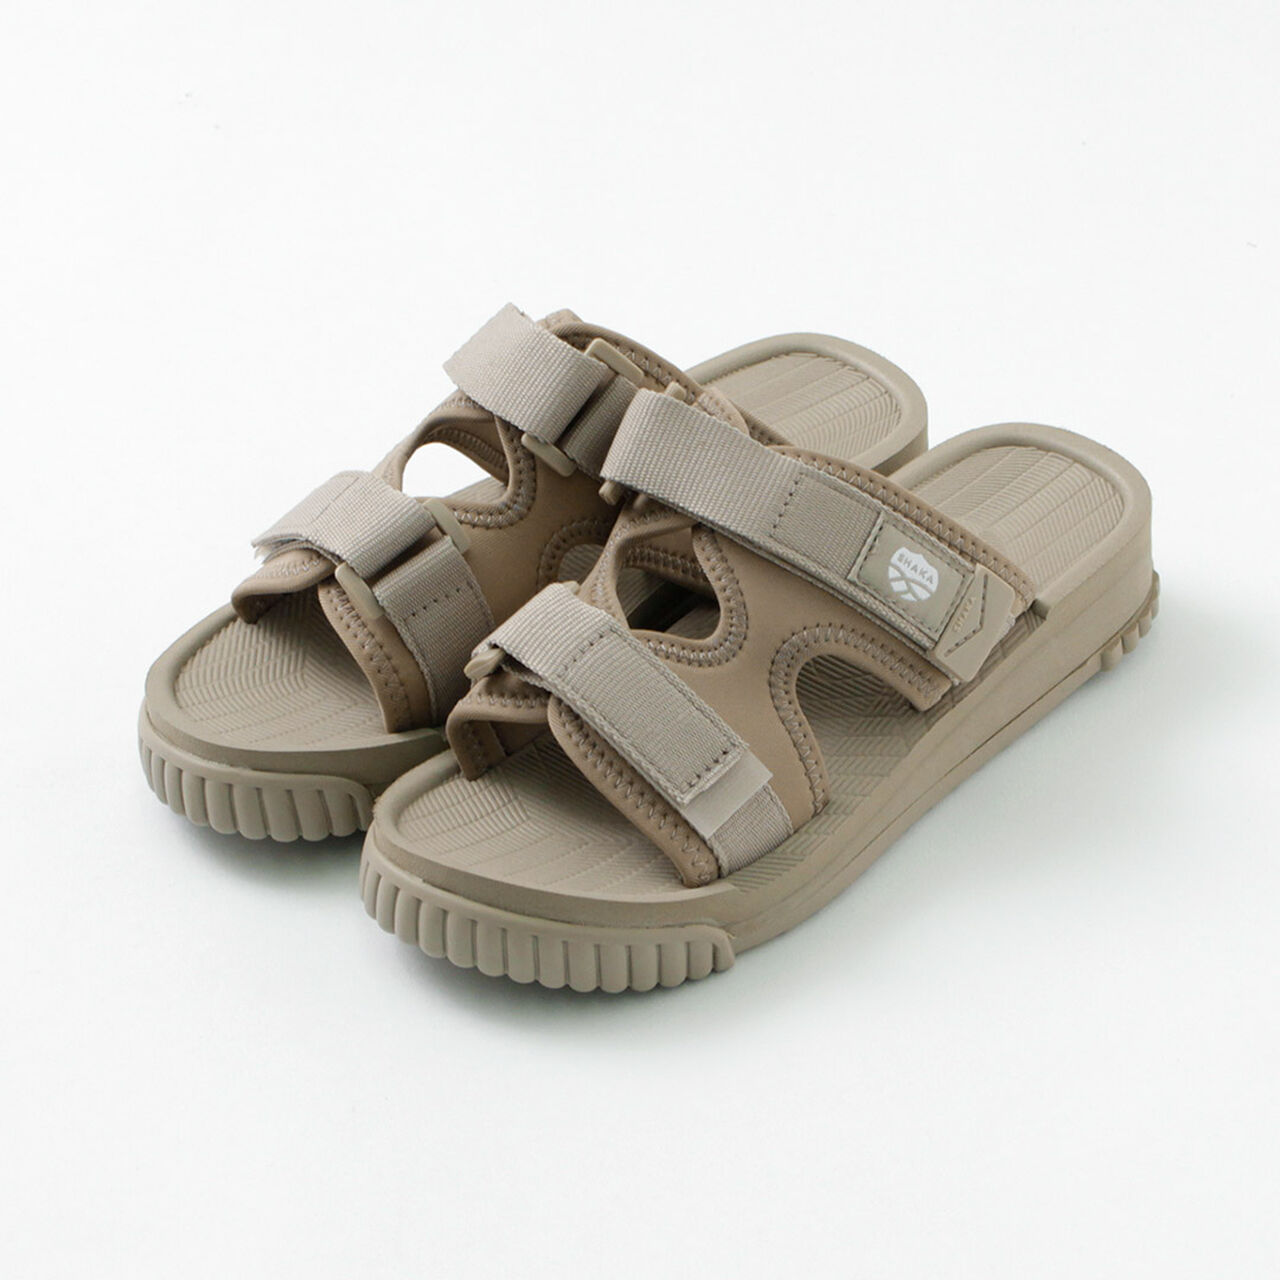 Chill Out Sandals,Taupe, large image number 0